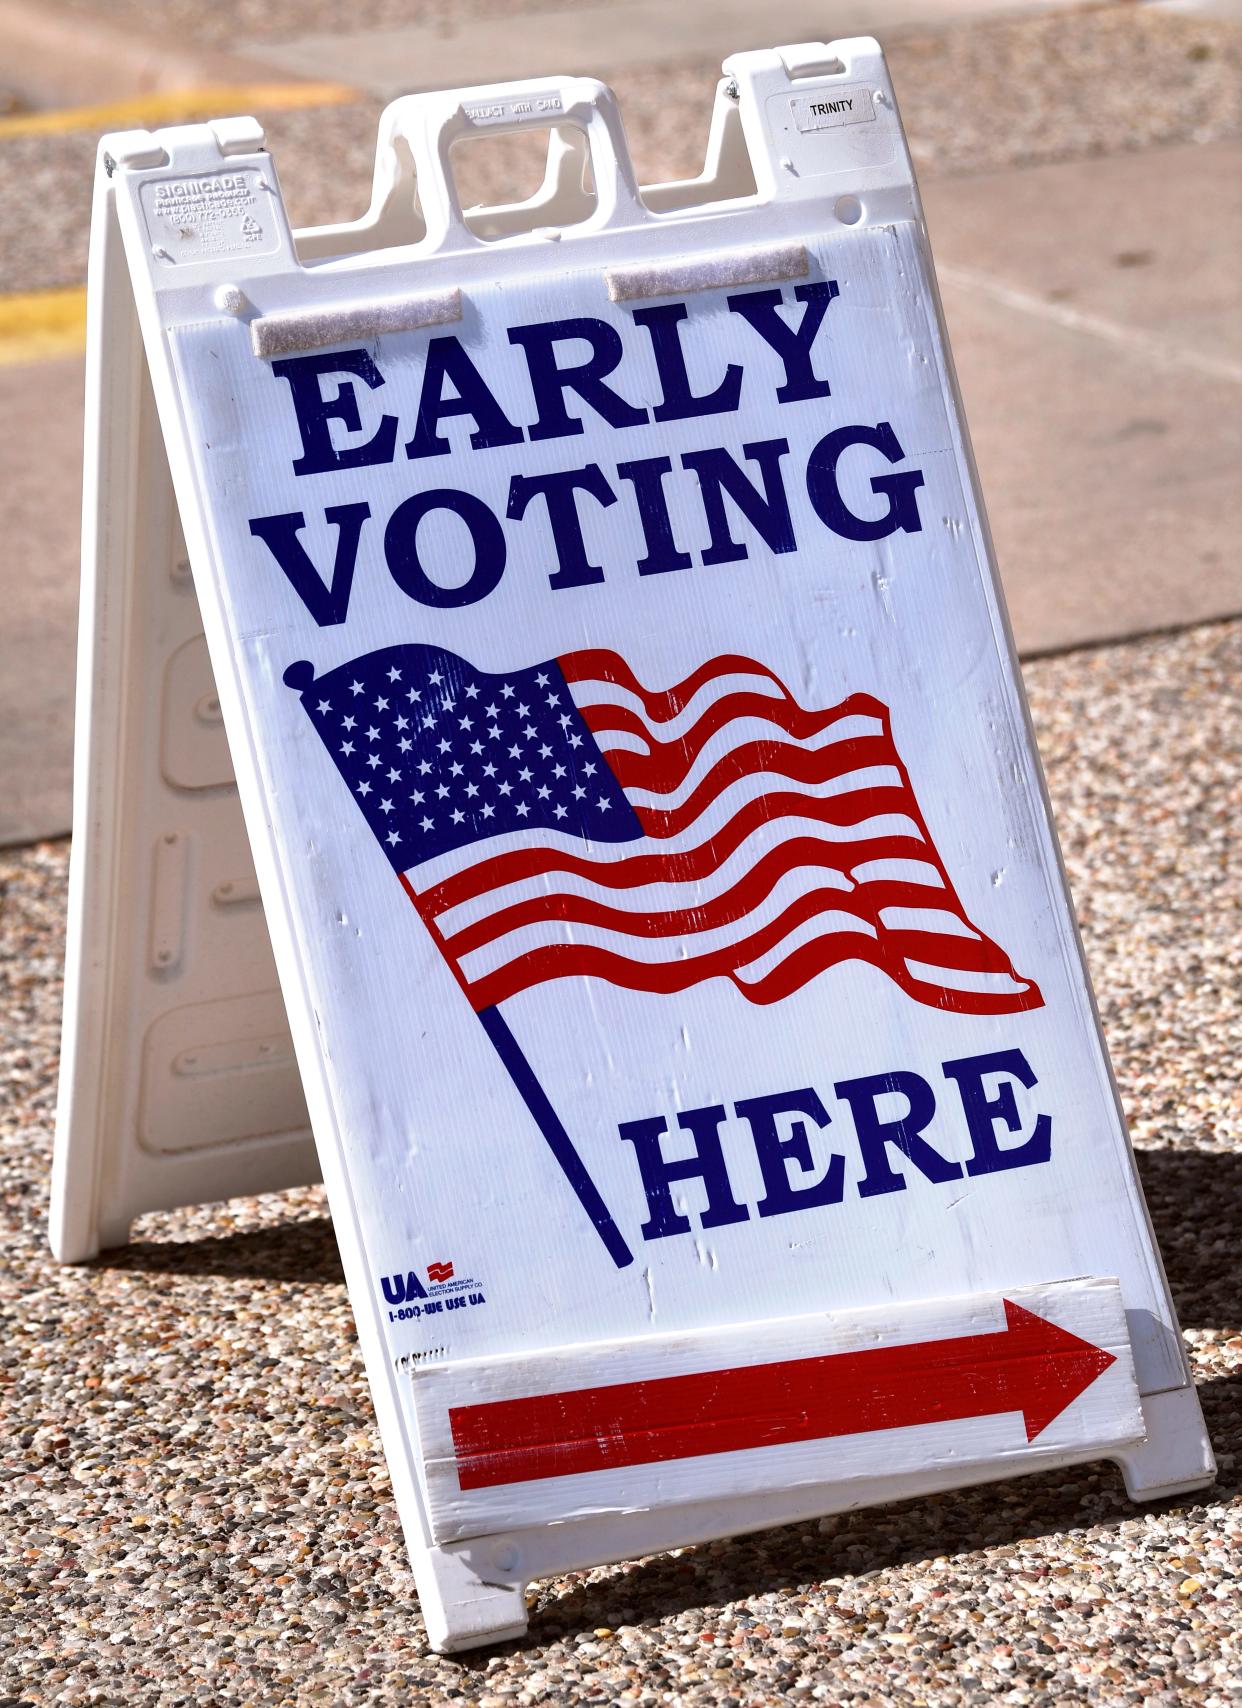 An early voting sign from a previous election held in Abilene.